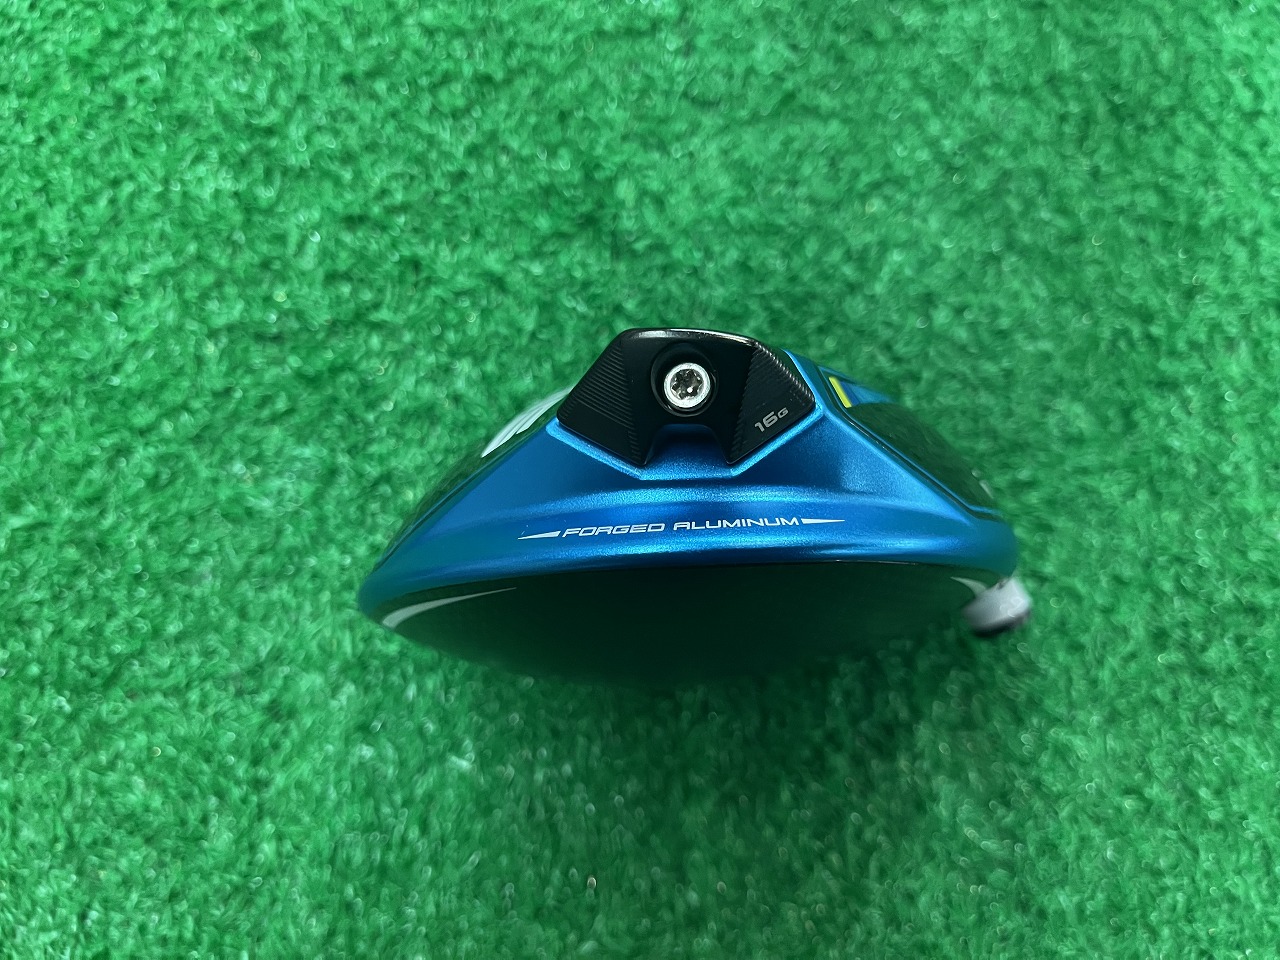  Sim 2 Driver head [9] head cover / wrench attaching TaylorMade sim2 taylormade #*MP@1*V*087